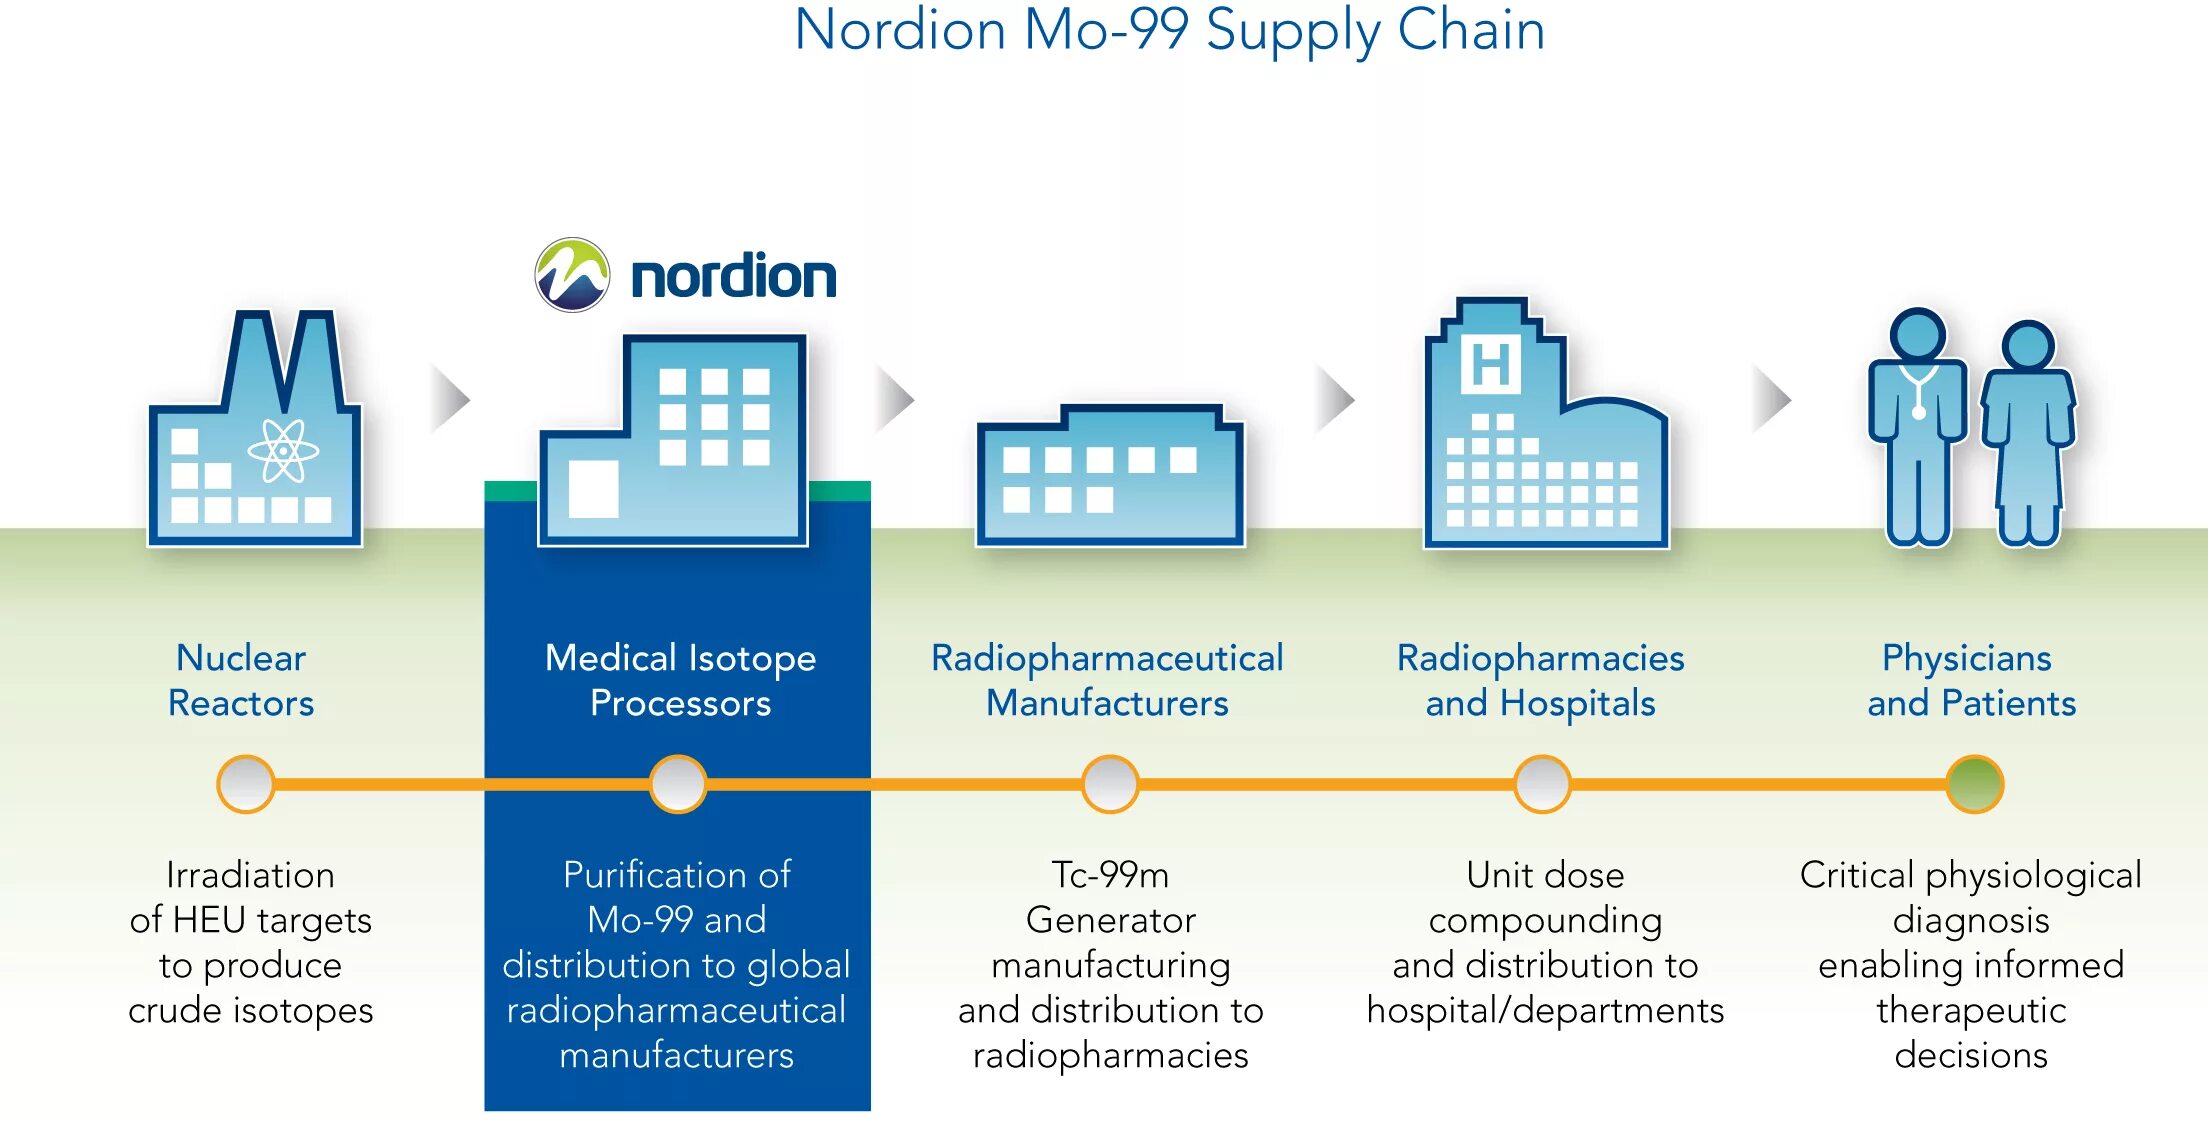 Page supply. Supply Chain. Supply Chain in Hospital. Supply Chain Management in Hospitals. Supply Manager.